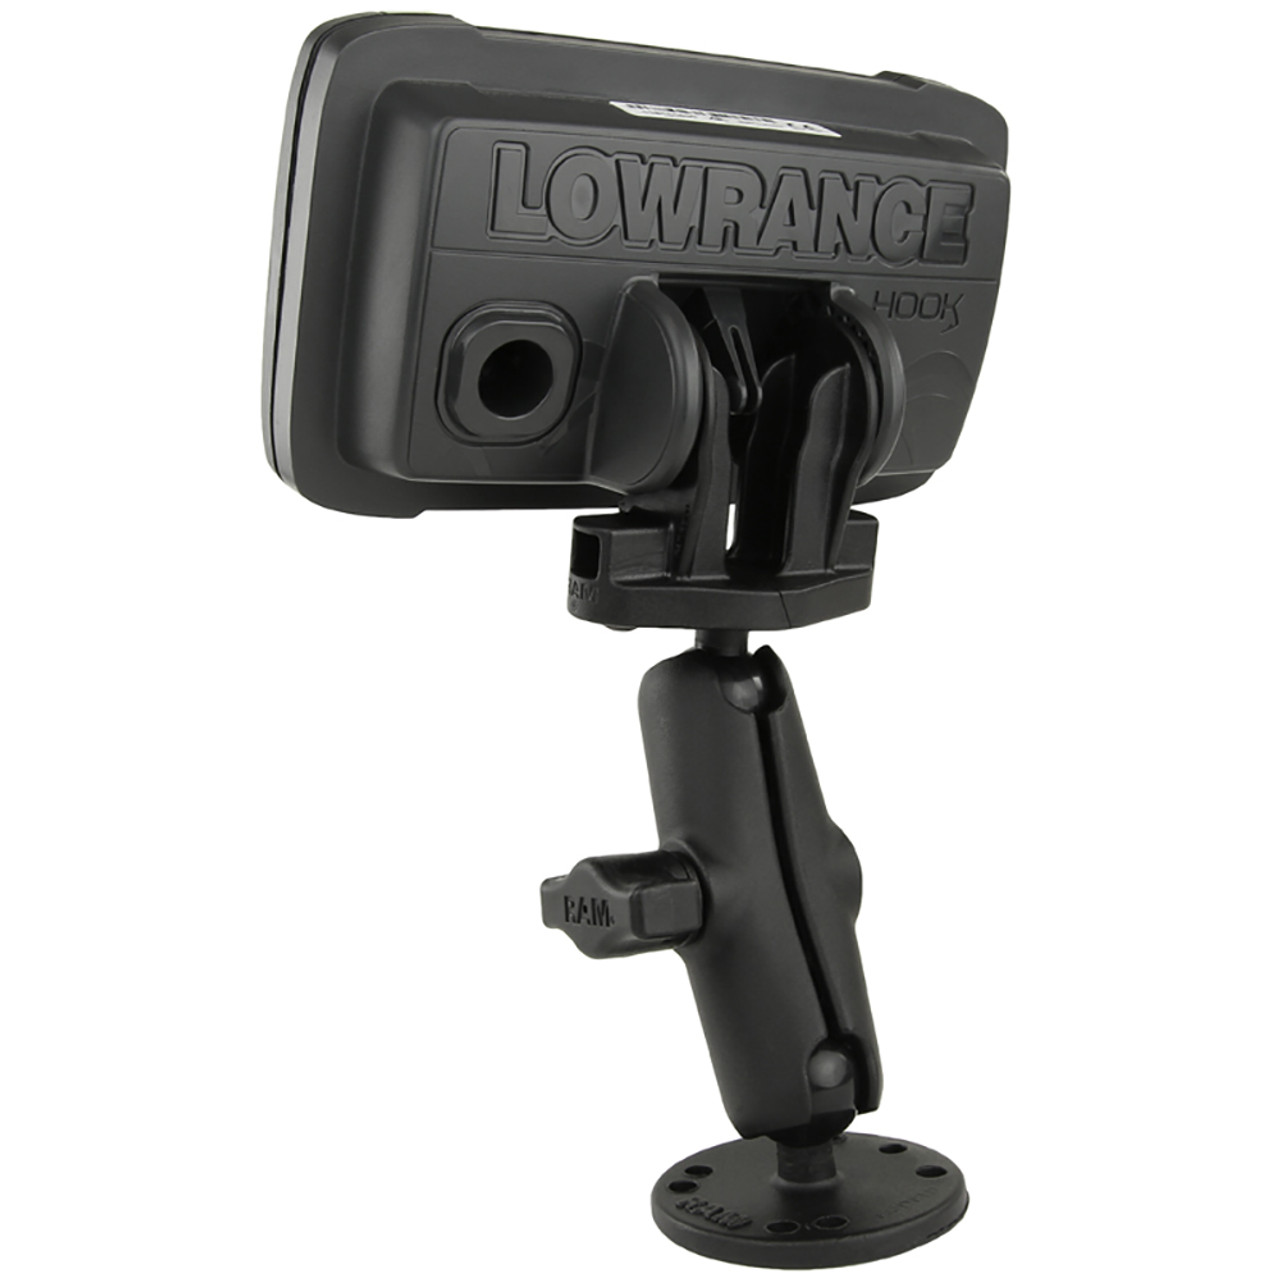 Ram Mount B Size 1 Fishfinder Ball Adapter for The Lowrance Hook2 Series